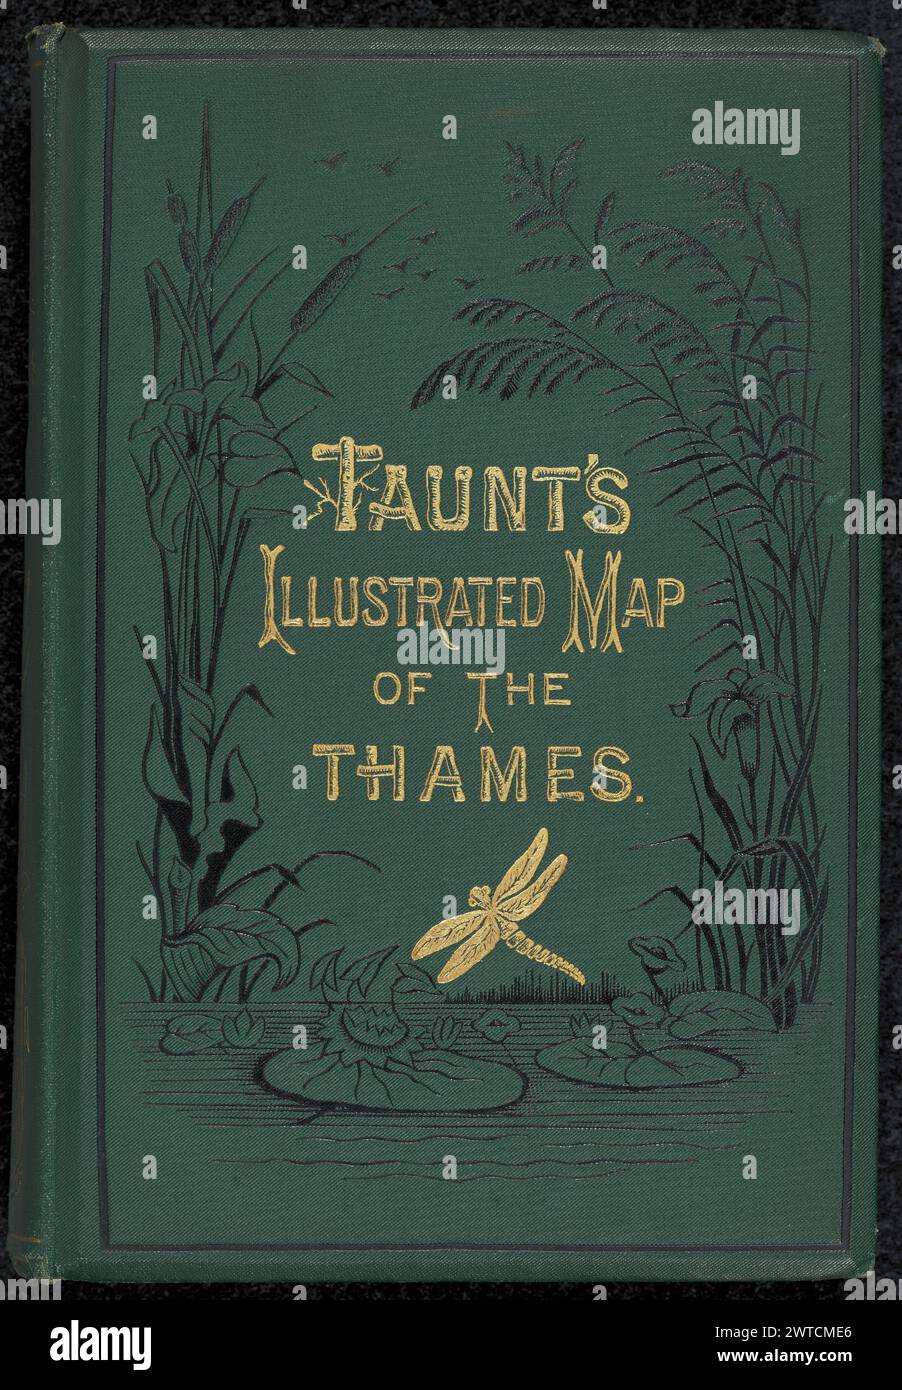 A New Map of the River Thames, From Thames Head to London...Sixth Edition. Henry W. Taunt, photographer (British, 1842 - 1922) 1897 Green cloth-bound with gold leaf title and embossing over front cover. 33 maps illustrated with photographs. Stock Photo